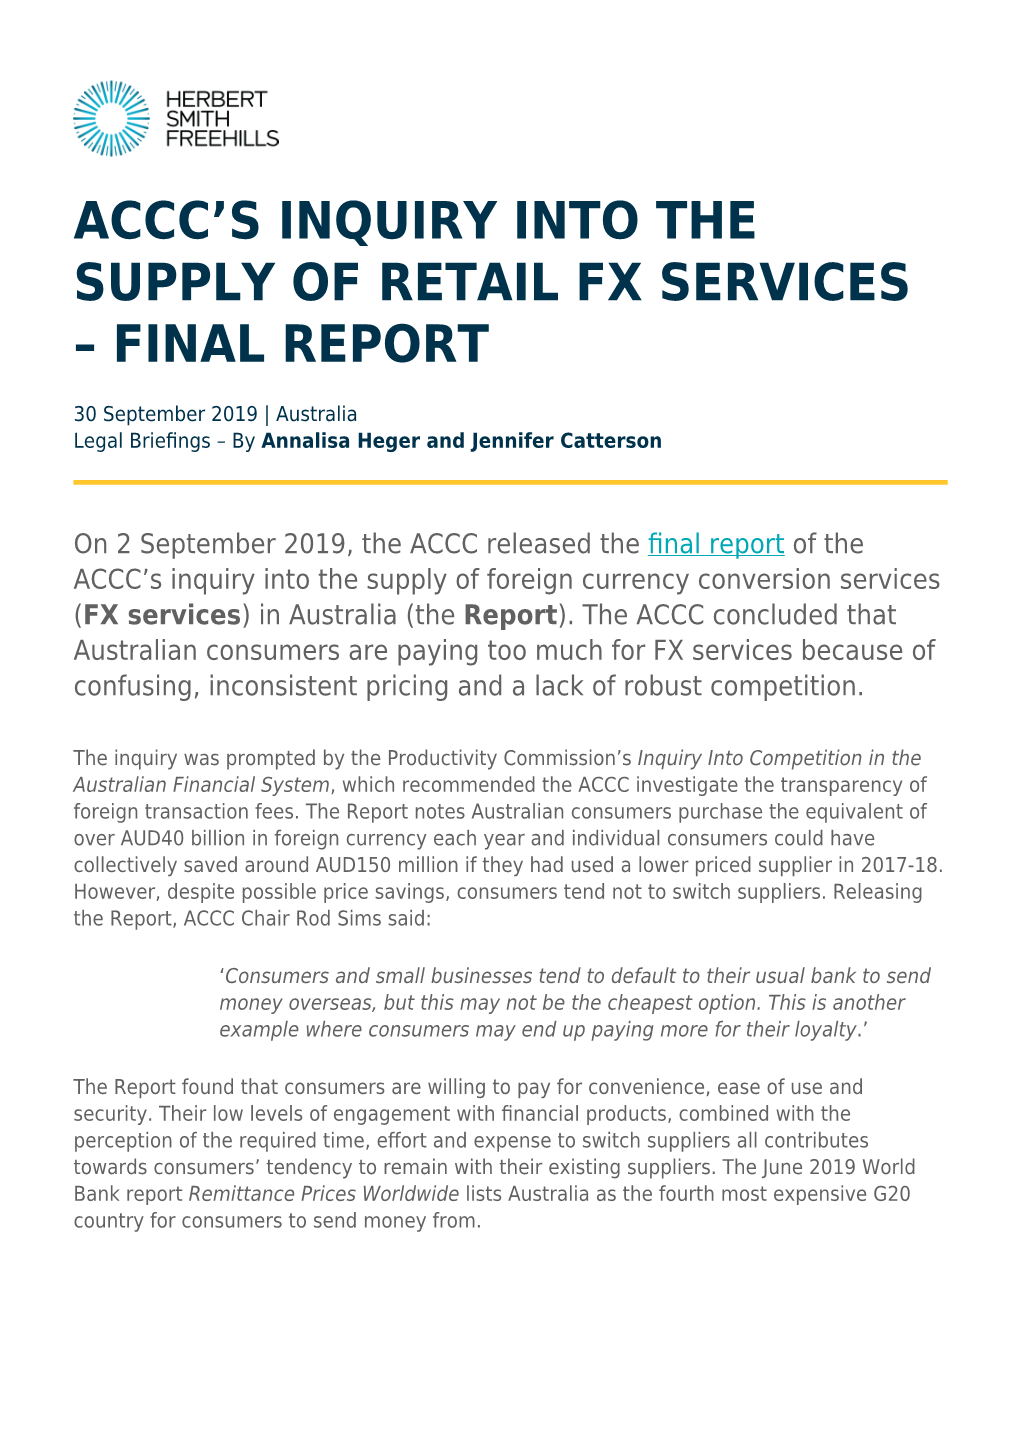 ACCC's Inquiry Into the Supply of Retail FX